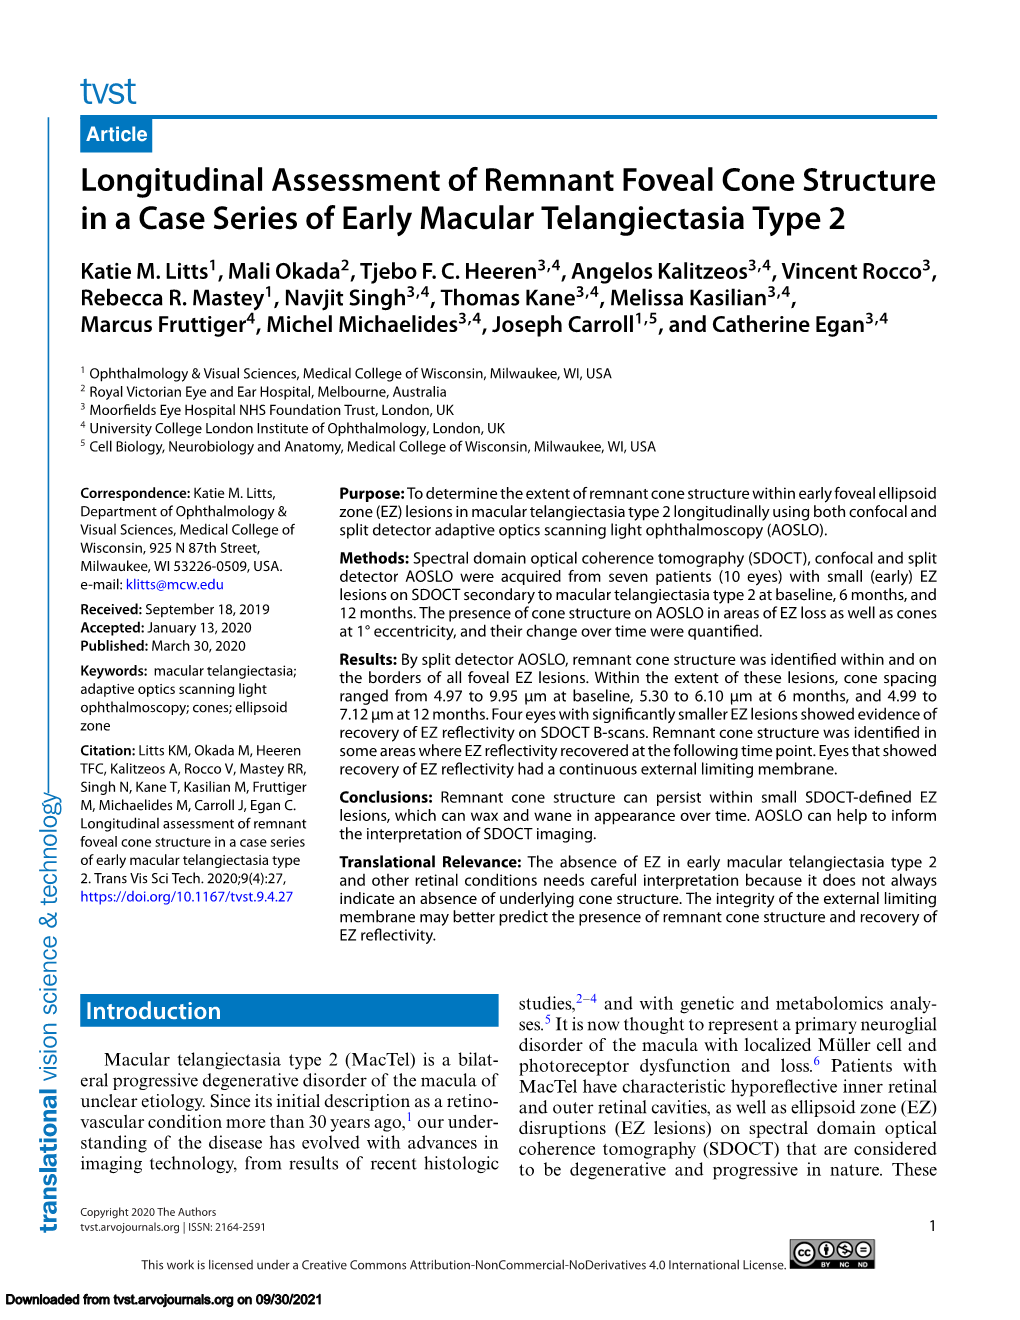 Longitudinal Assessment of Remnant Foveal Cone Structure in a Case Series of Early Macular Telangiectasia Type 2